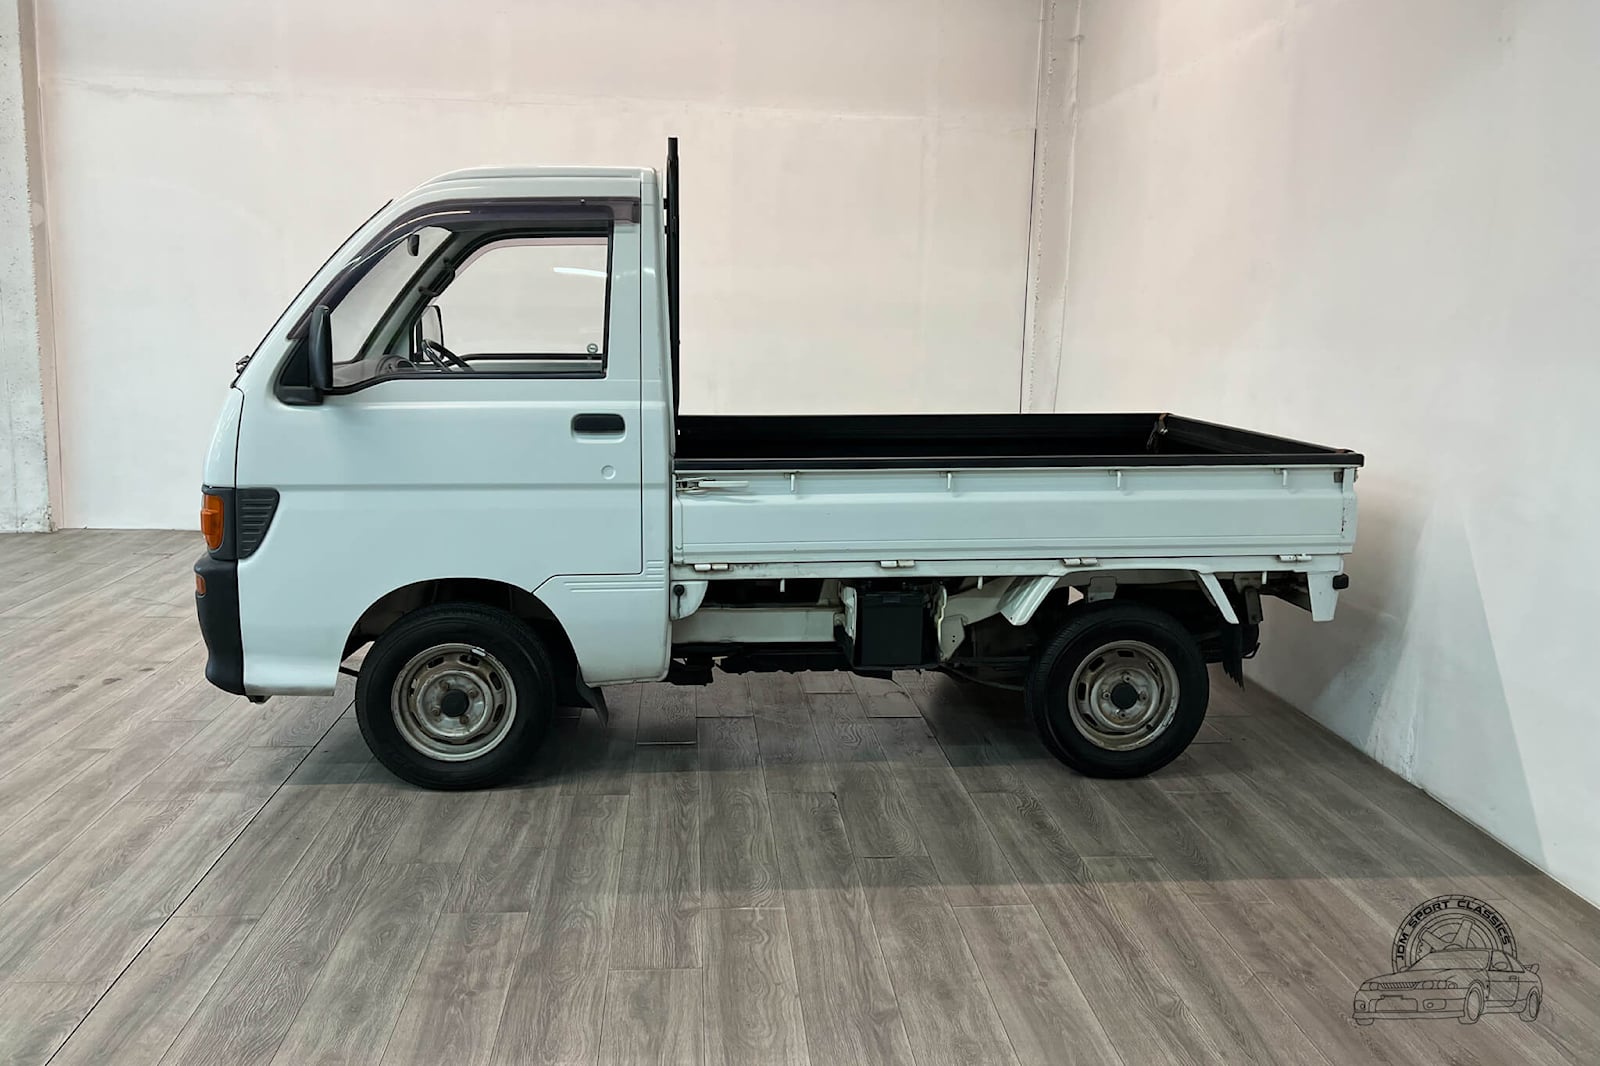 American Farmers Are Saving Money By Importing Small Japanese Trucks ...